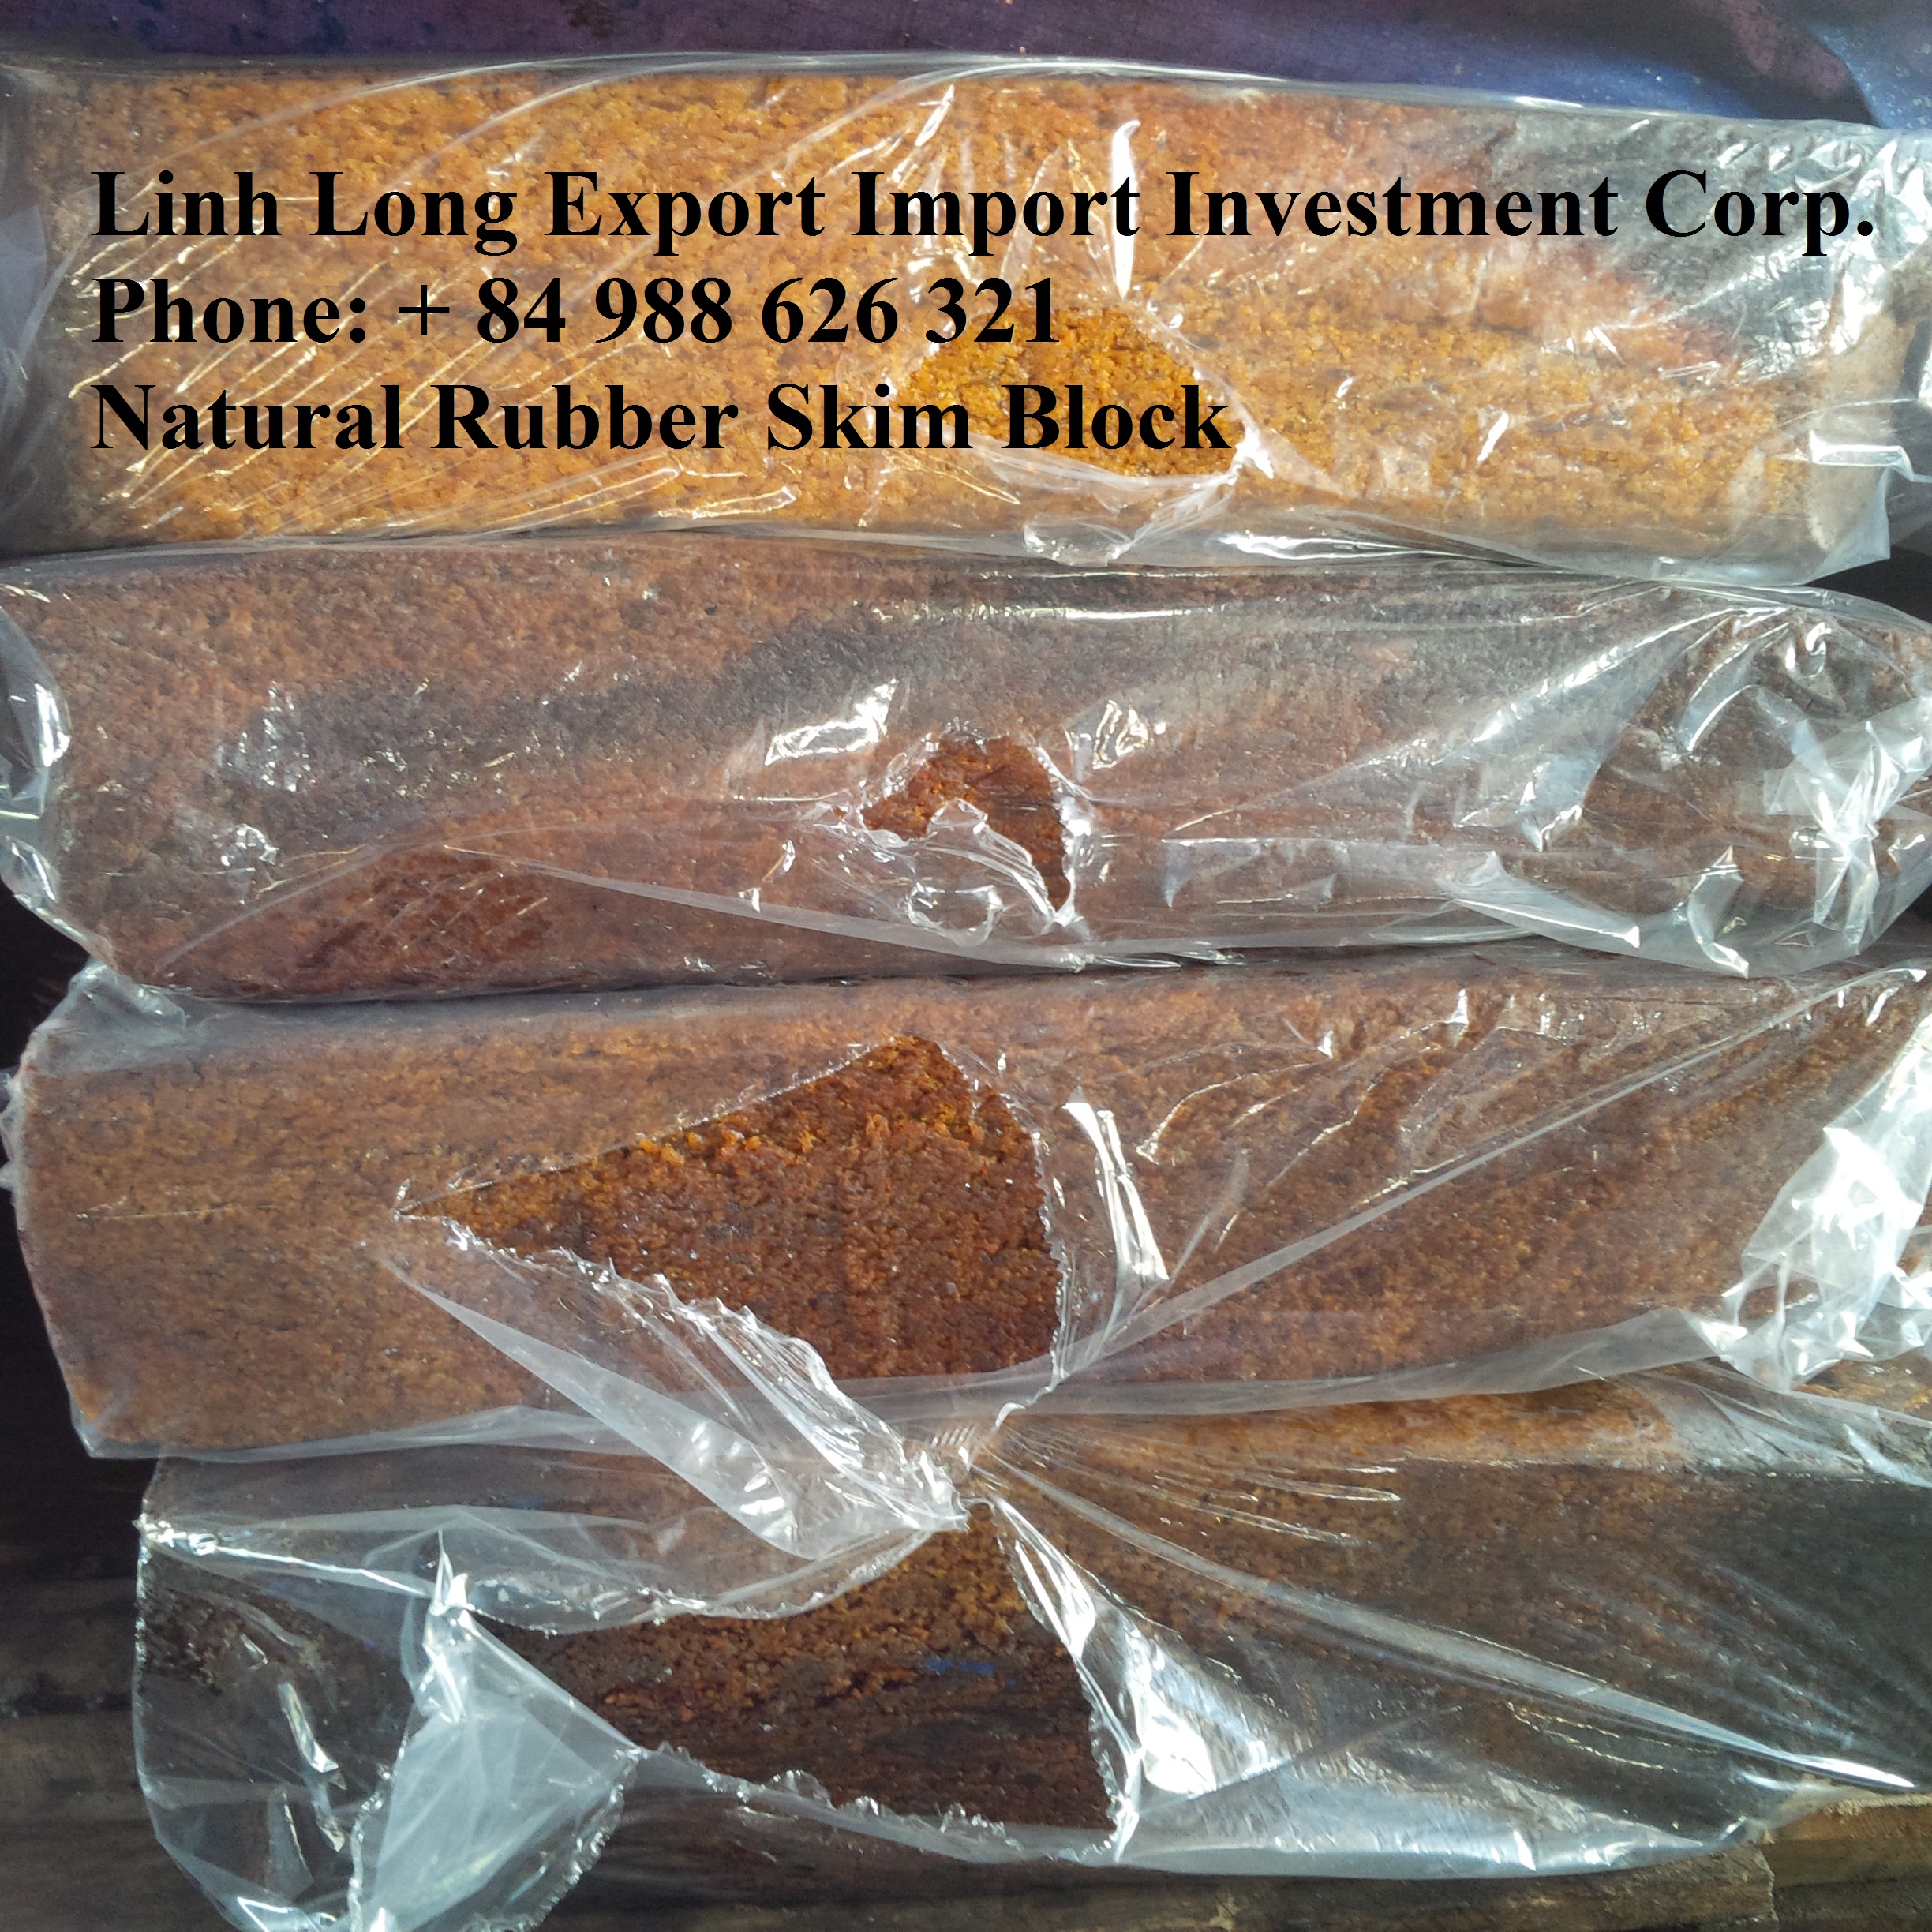 Linh Long Export Import Investment Corporation